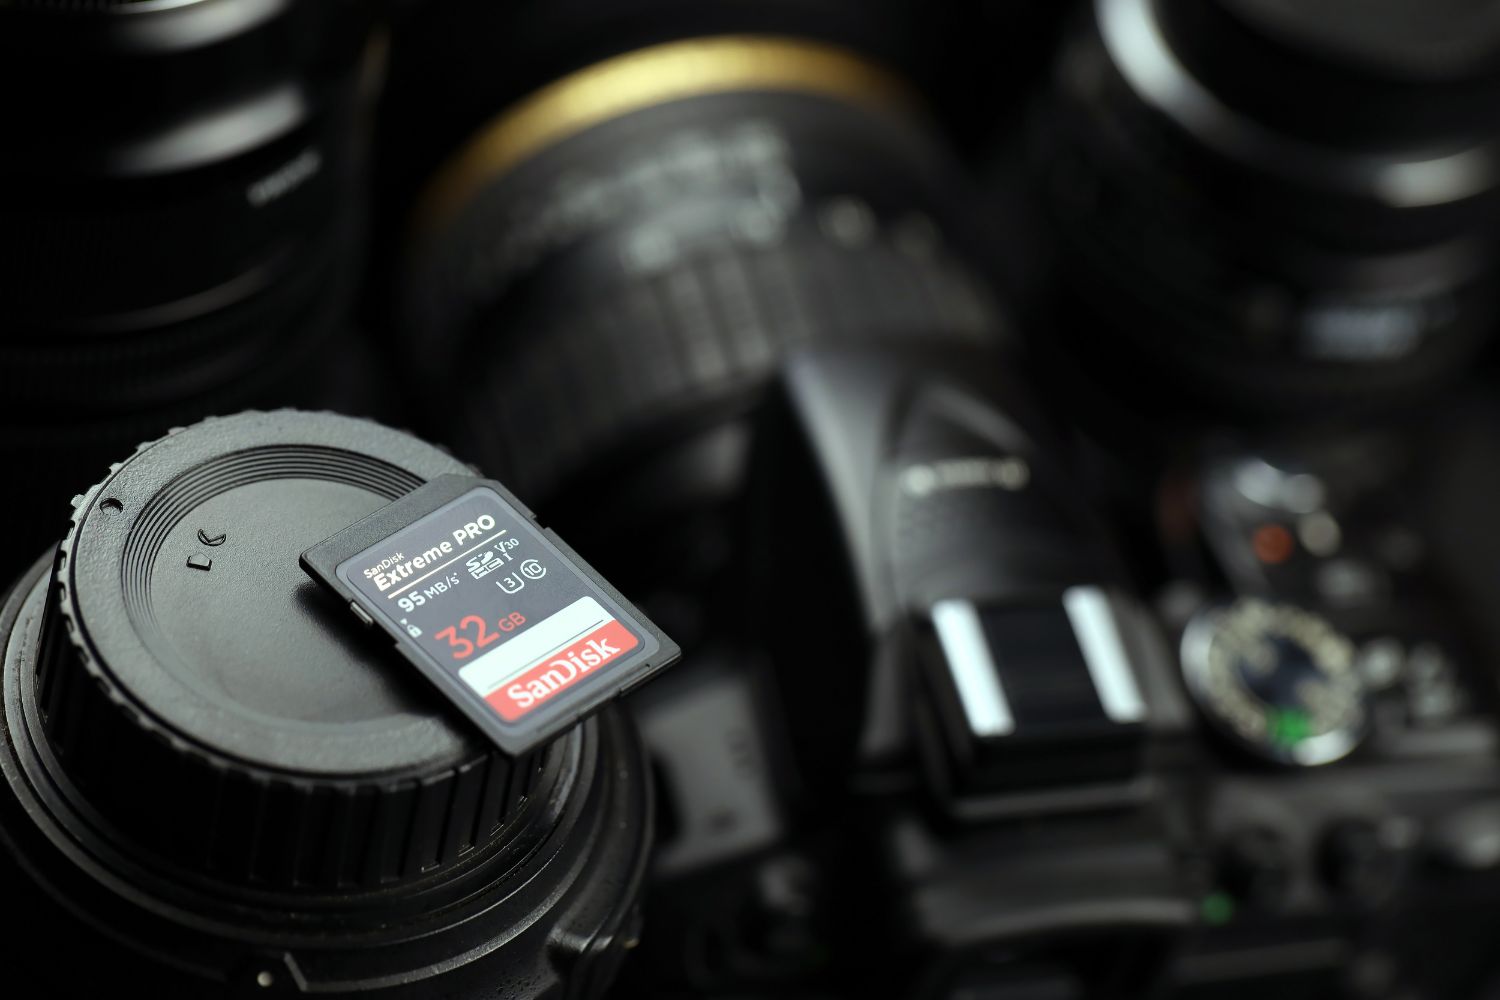 memory card of camera Photo by Mehaniq on shutterstock